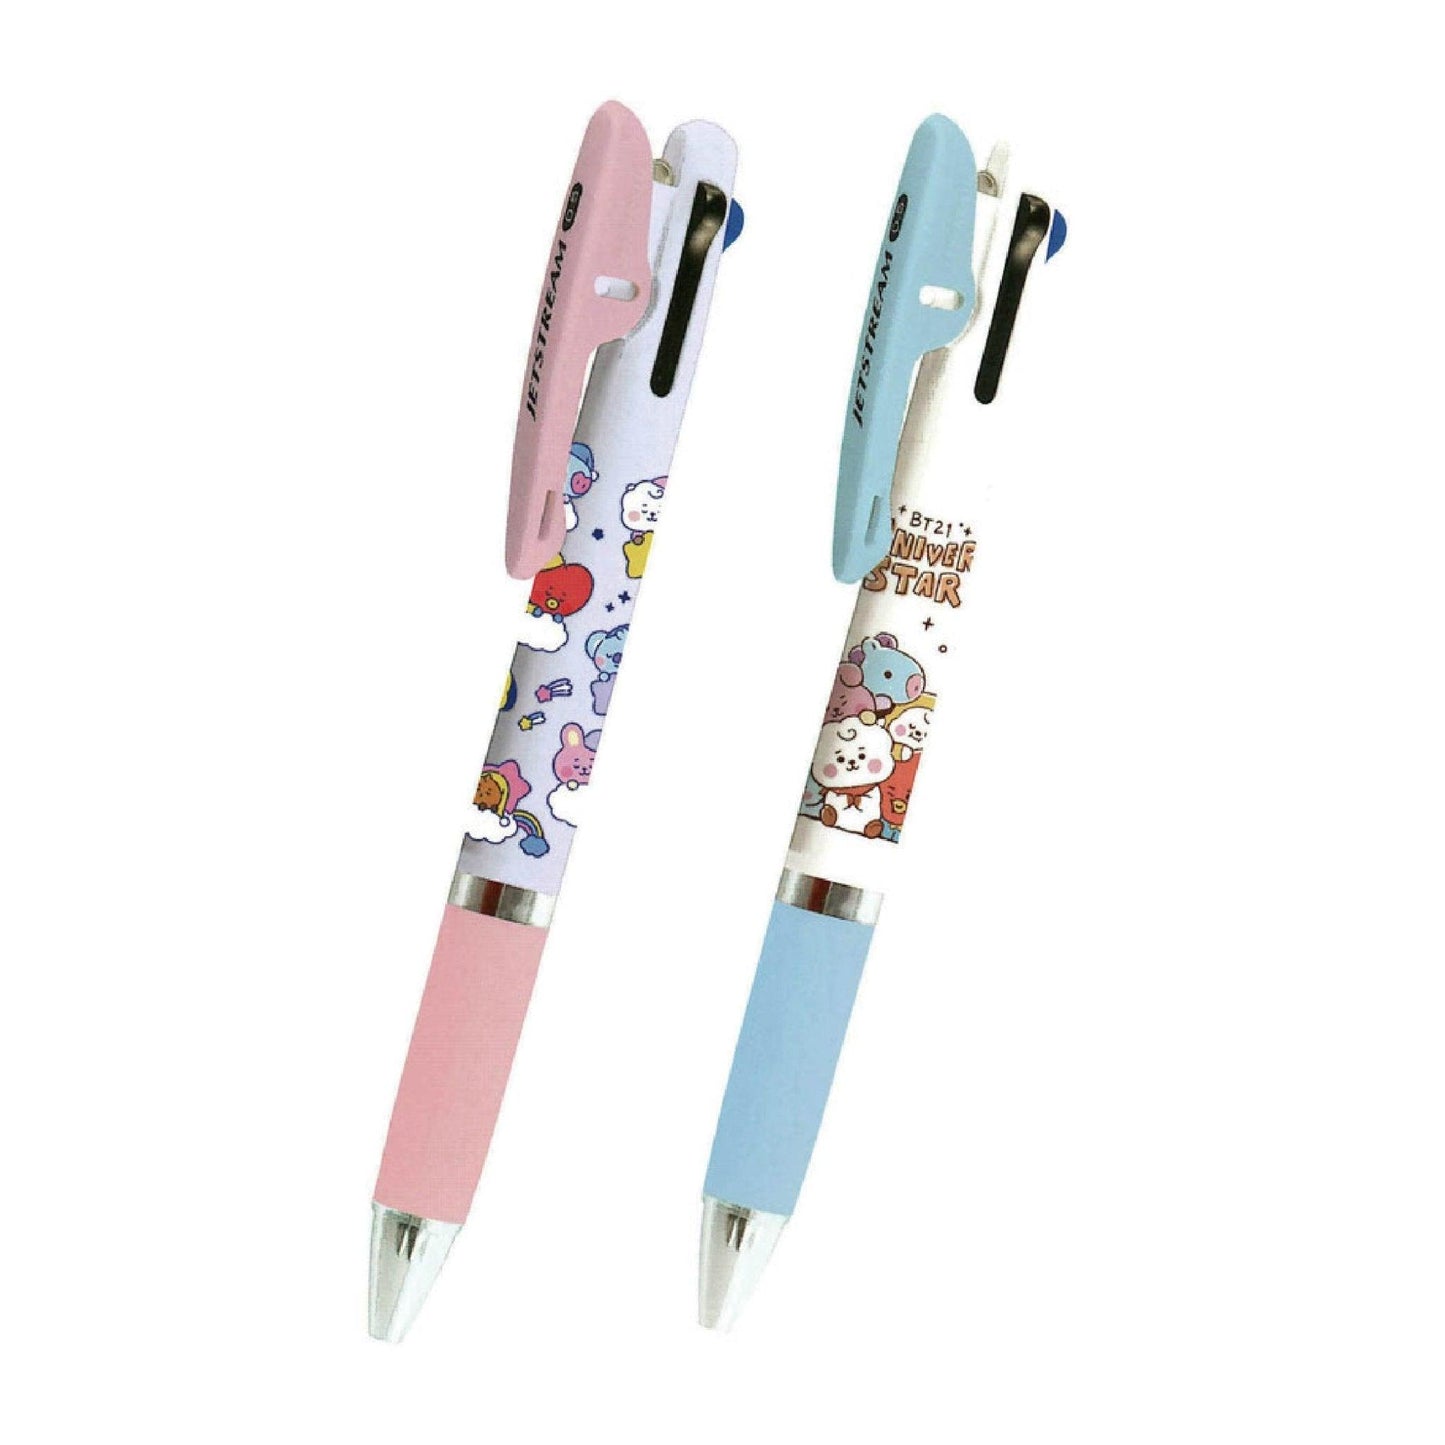 KAMIO x UNI 790455 JETSTREAM BT21 limited joint cute pink color 0.5MM three-color Ballpoint pen - CHL-STORE 